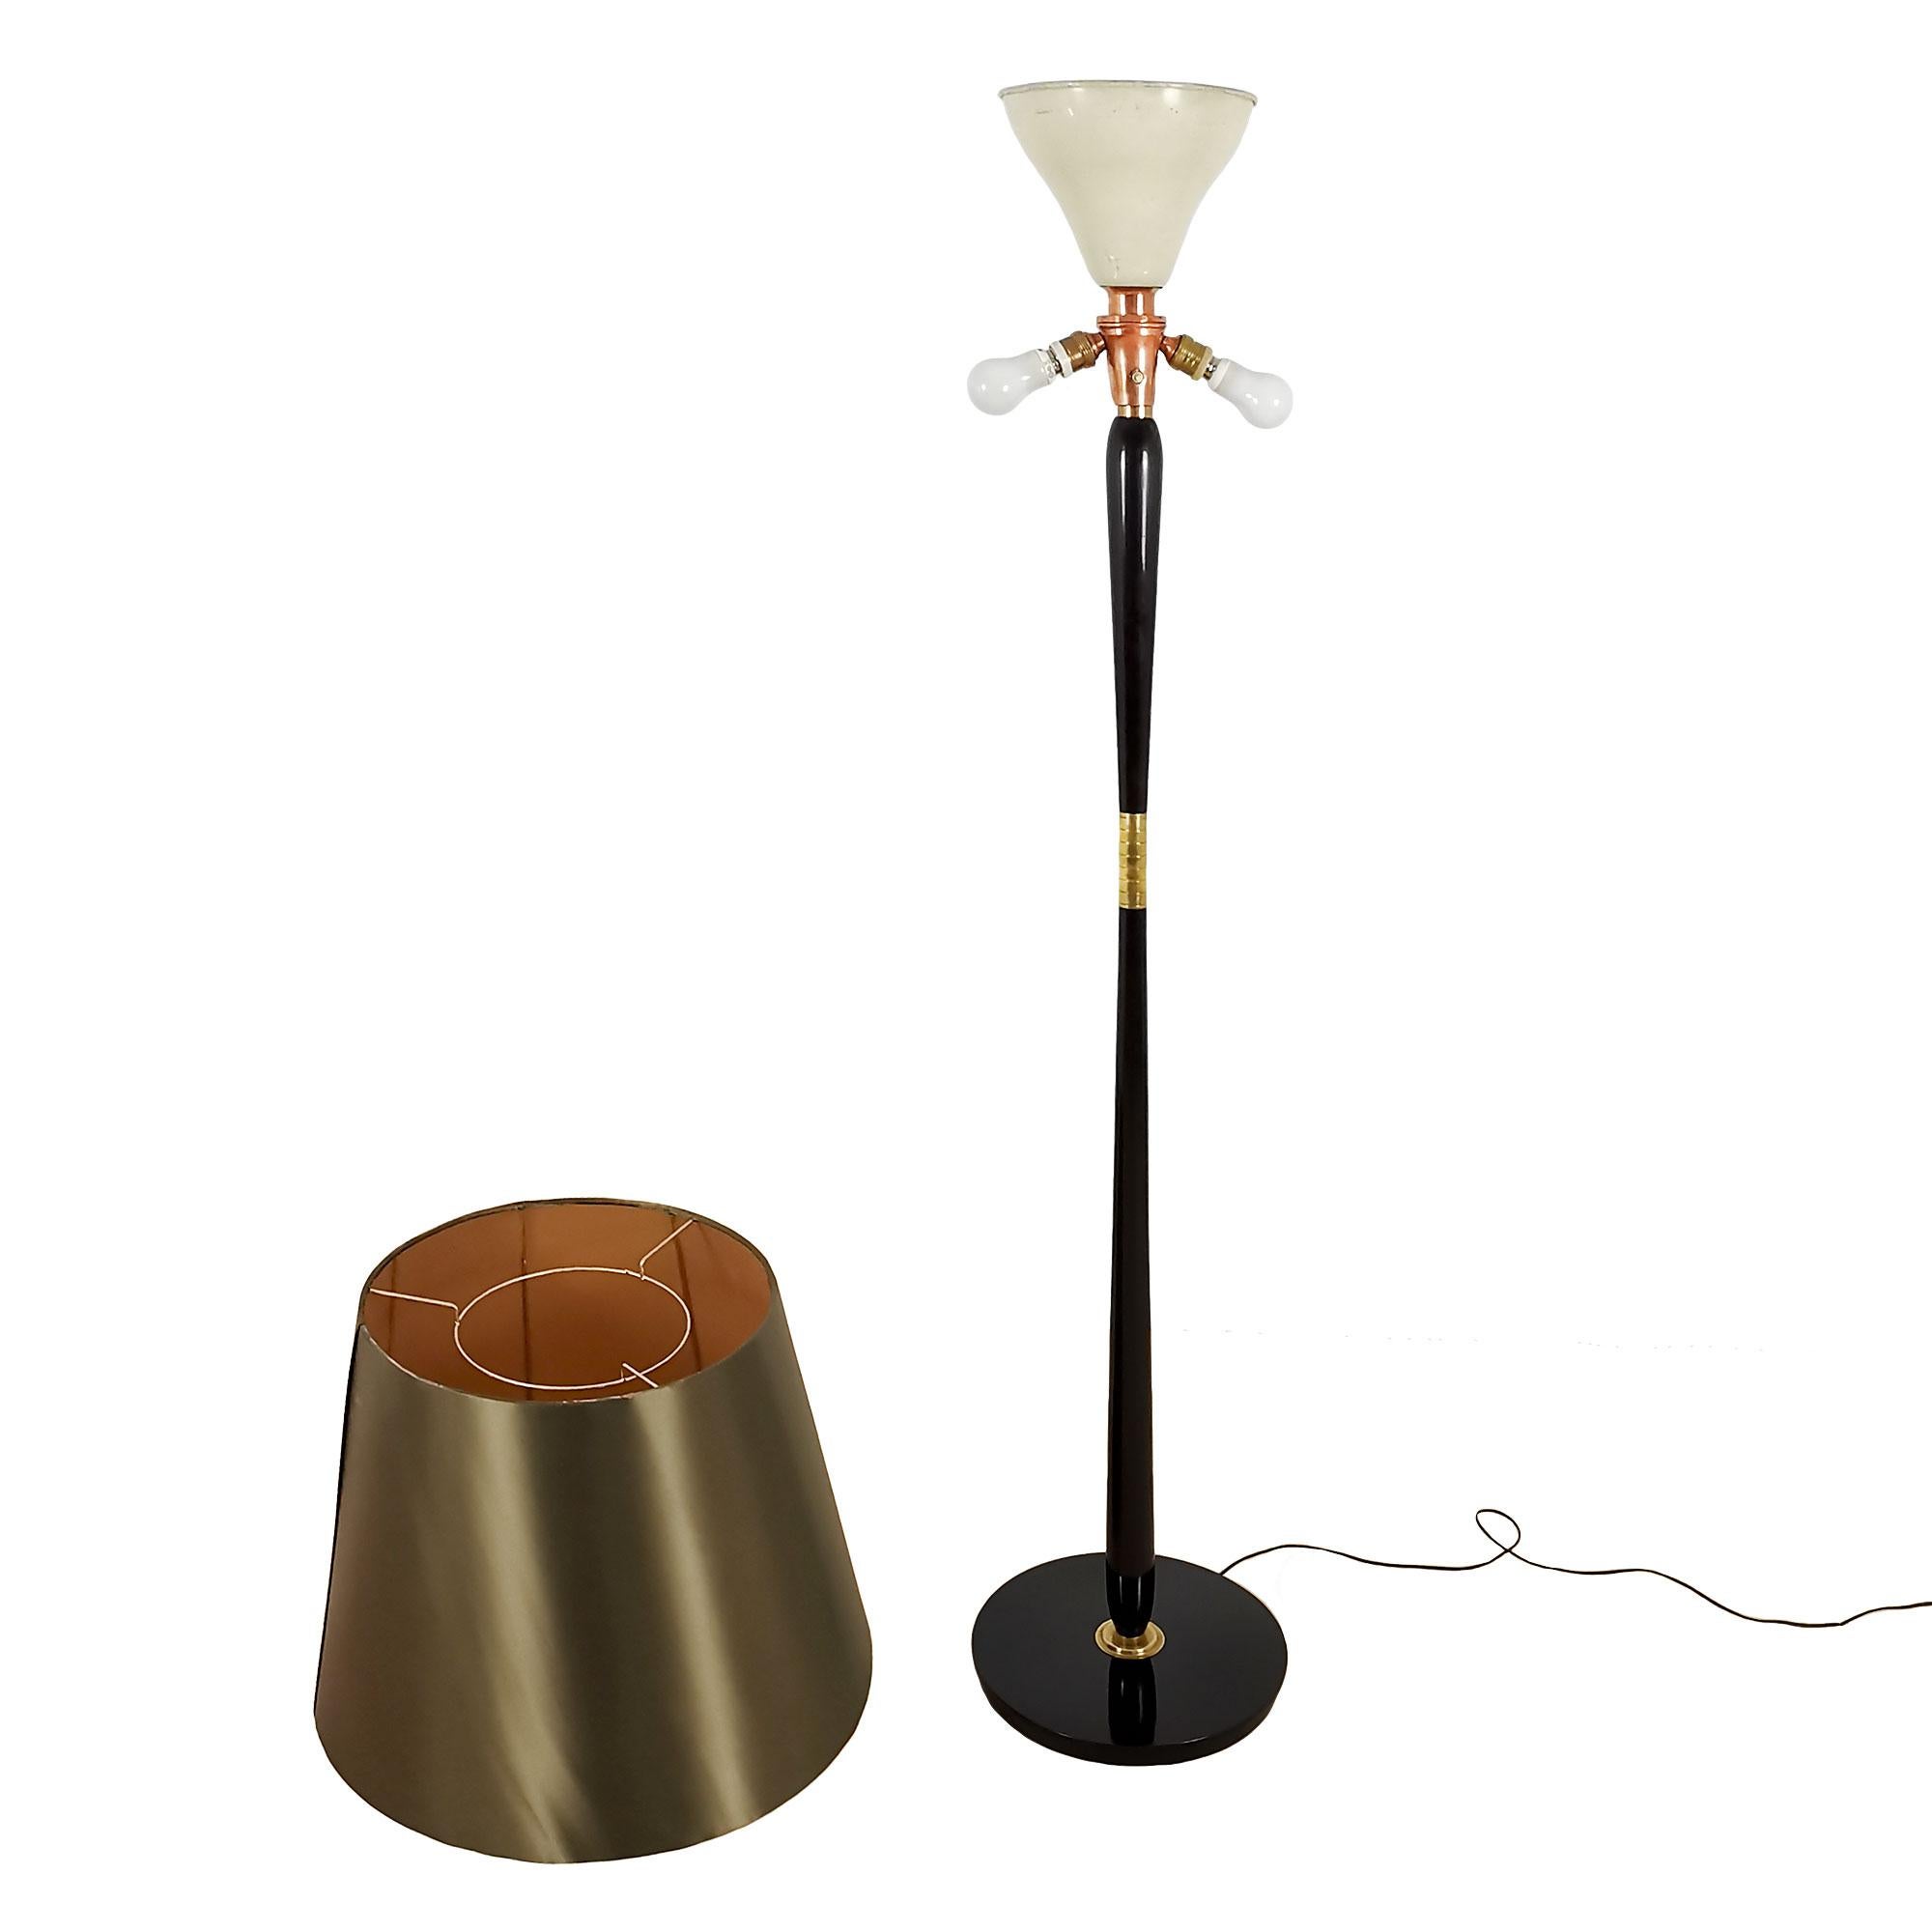 Mid-20th Century Mid-Century Modern Standing Lamp with Double Lighting System - Italy, 1940s For Sale